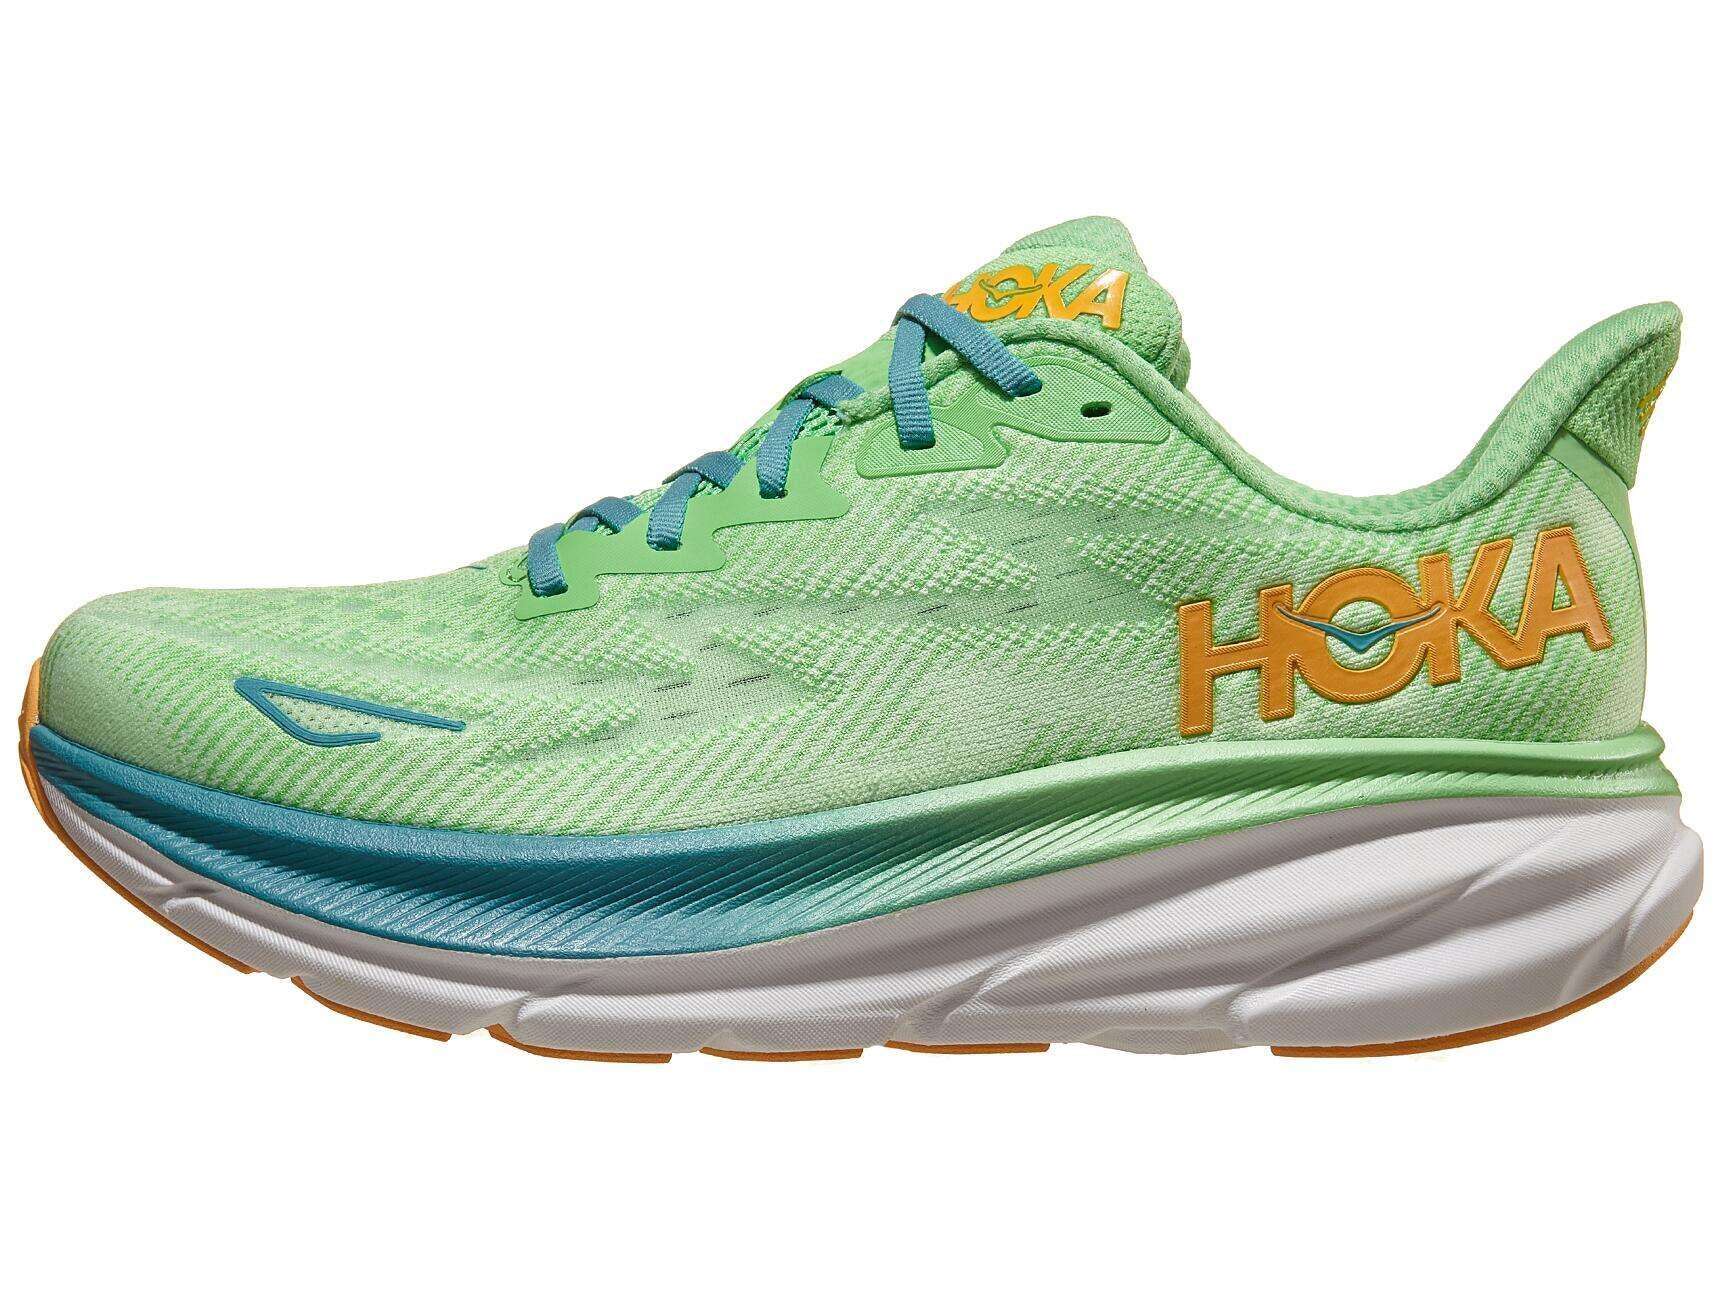 Chaussures Homme HOKA Clifton 9 Zest/Lime Glow